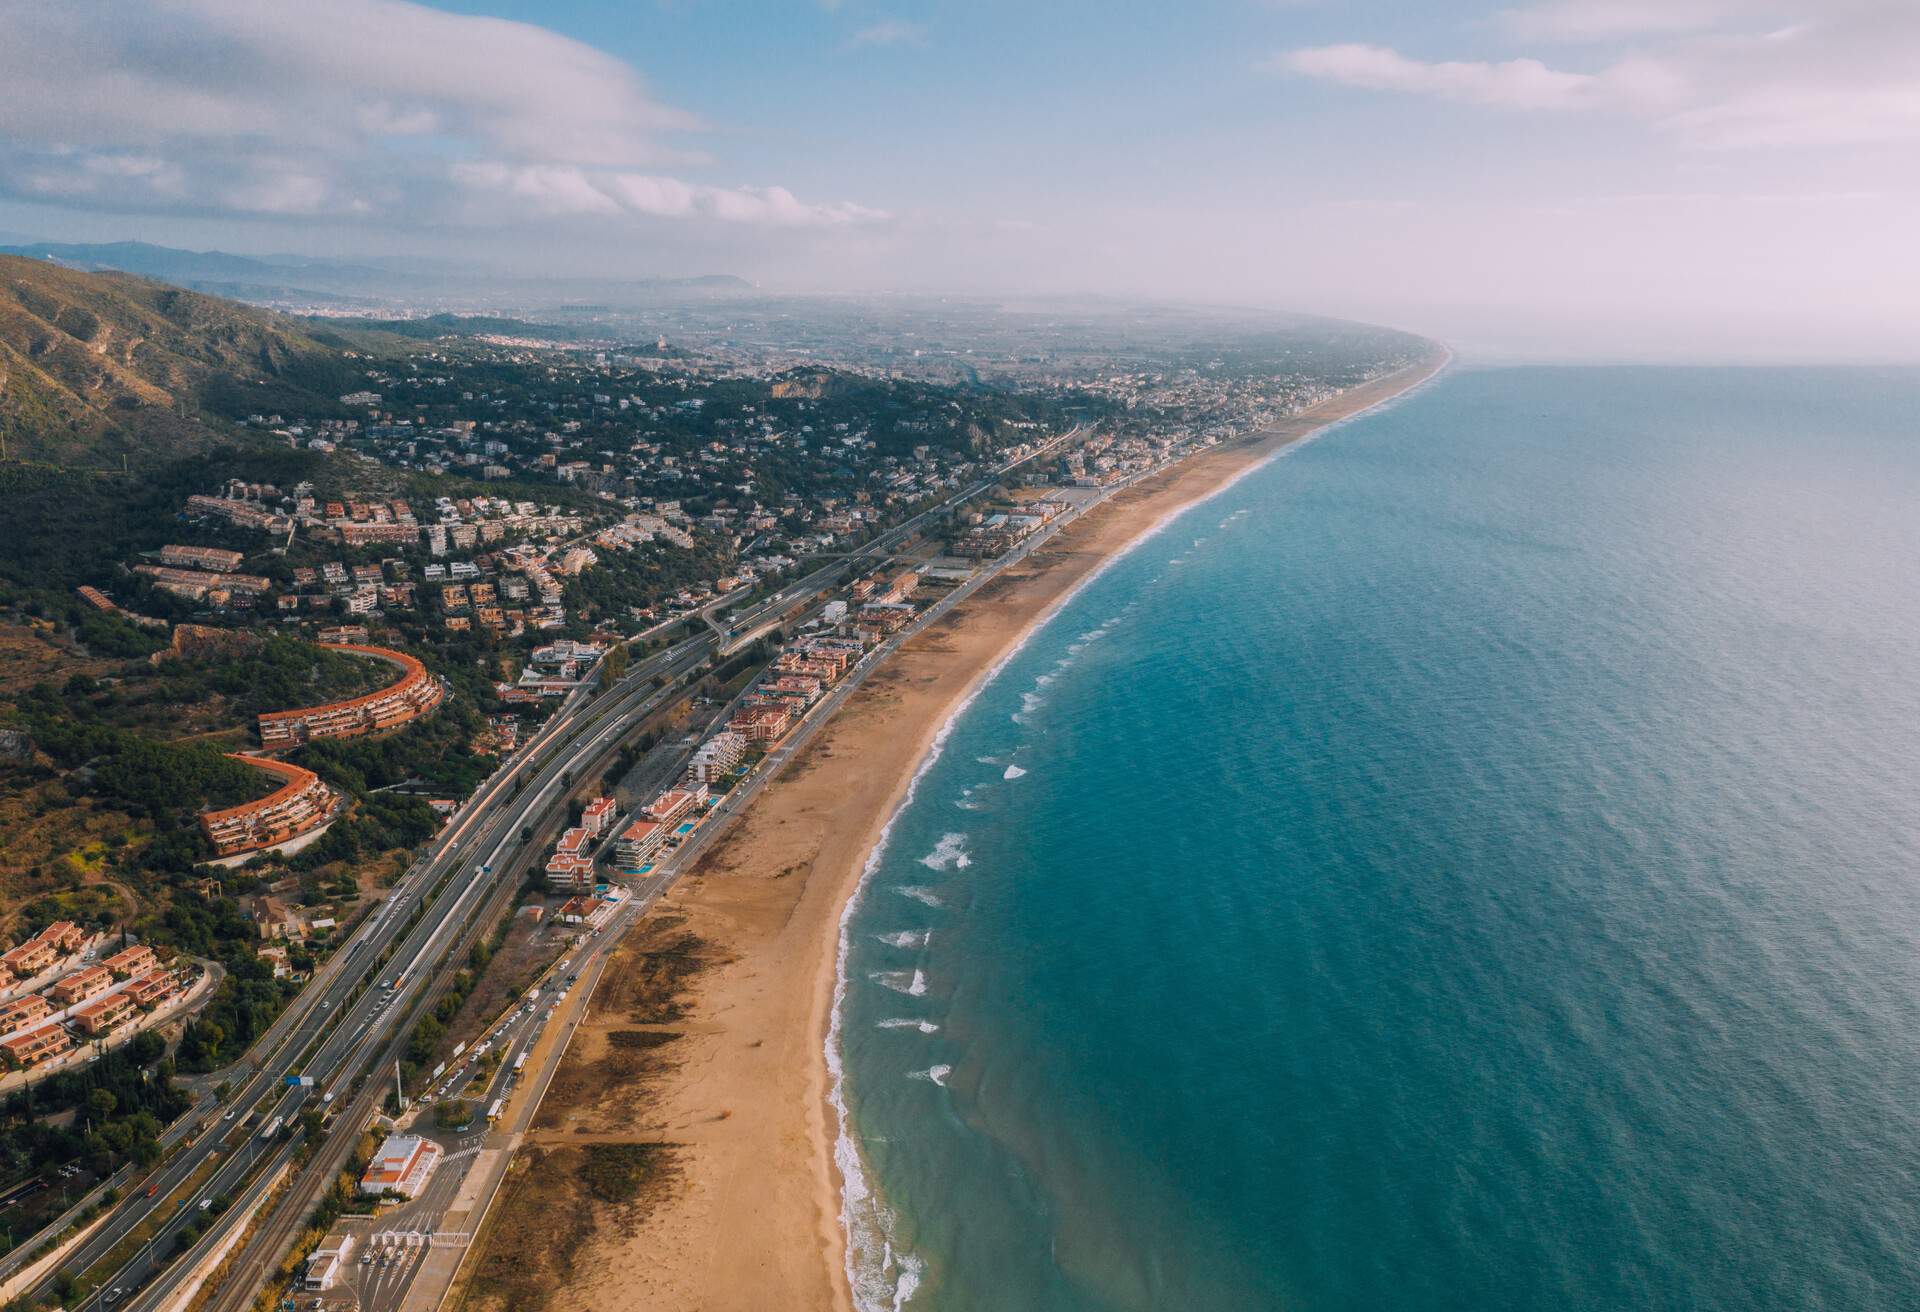 Aerial view of Castelldefels Coast. Castelldefels  is a municipality in the Baix Llobregat comarca, in the province of Barcelona in Catalonia, Spain, and a suburban town of the Metropolitan Area of Barcelona. Its population is 65,954.